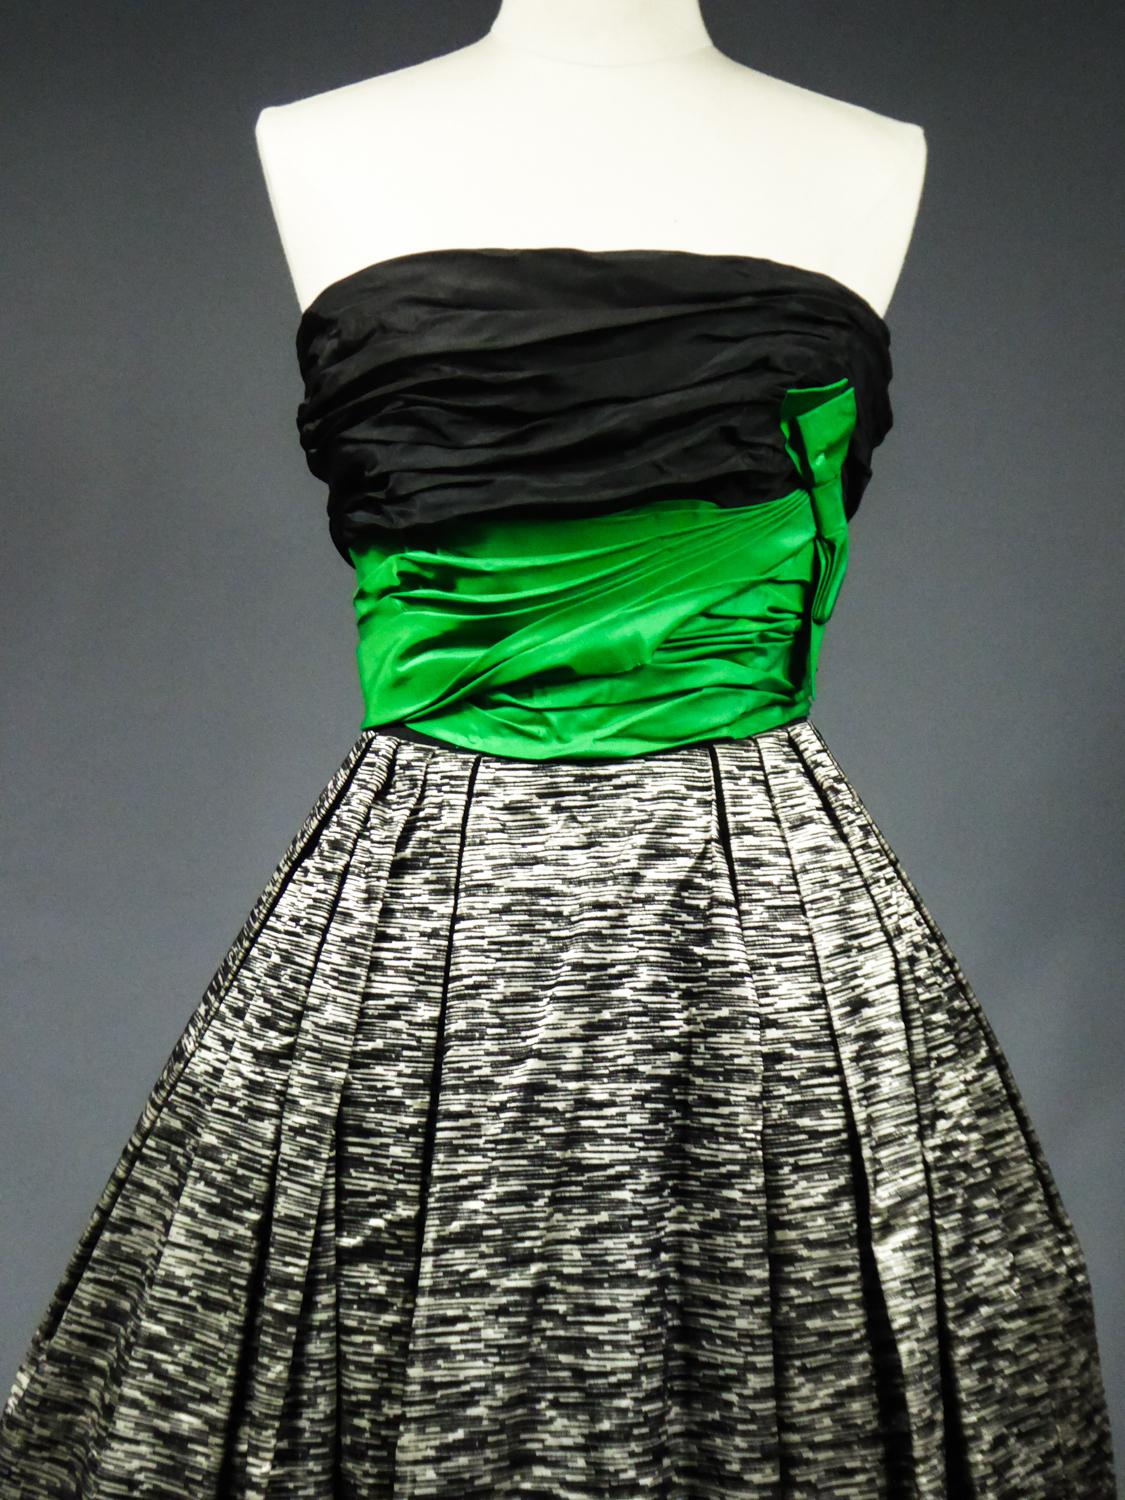 Circa 1955/1960
London England

Superb evening dress in taffeta and flocked velvet from the Jean Allen designer House in London from the late 1950s. The Pierre Balmain designer House in Paris supplied his models at Jean Allen designer House in